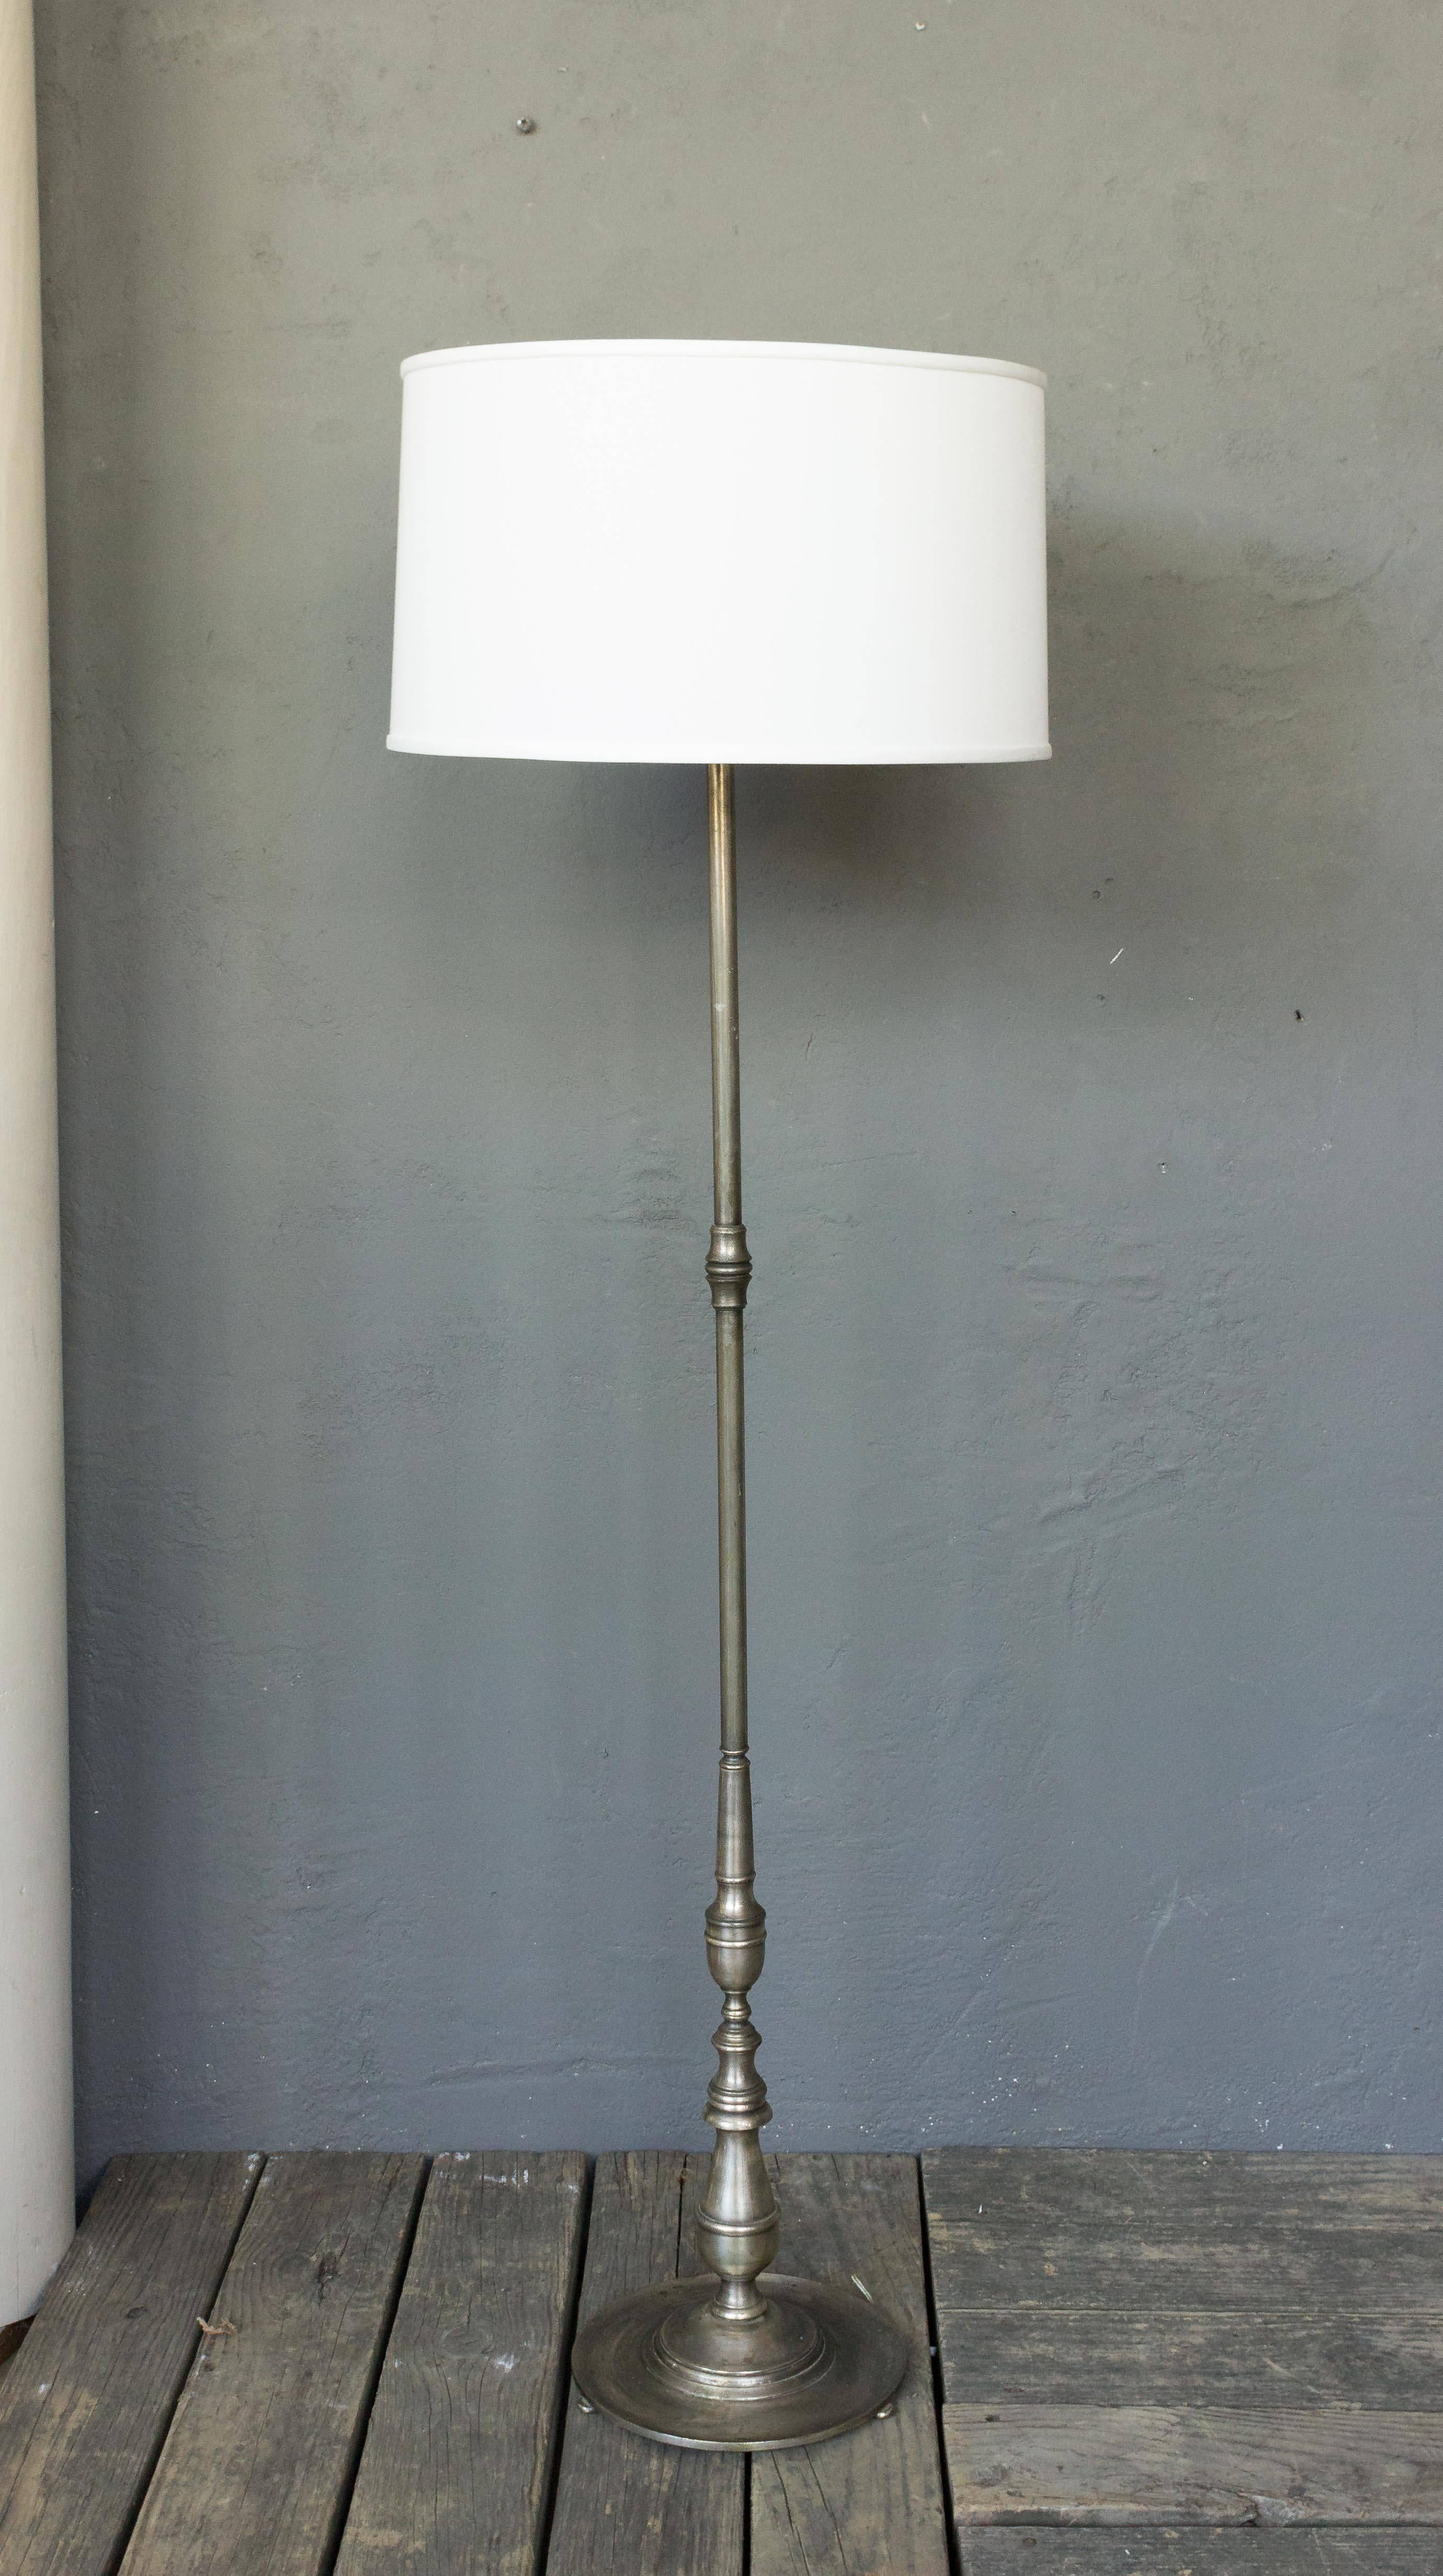 Classic 1940's French floor lamp with a rich silvered patina on a sturdy round base.

Price includes polishing or plating and new wiring. Please allow 2 to 3 weeks for completion. Not sold with shade (photographed with 10"H x 18" Diameter